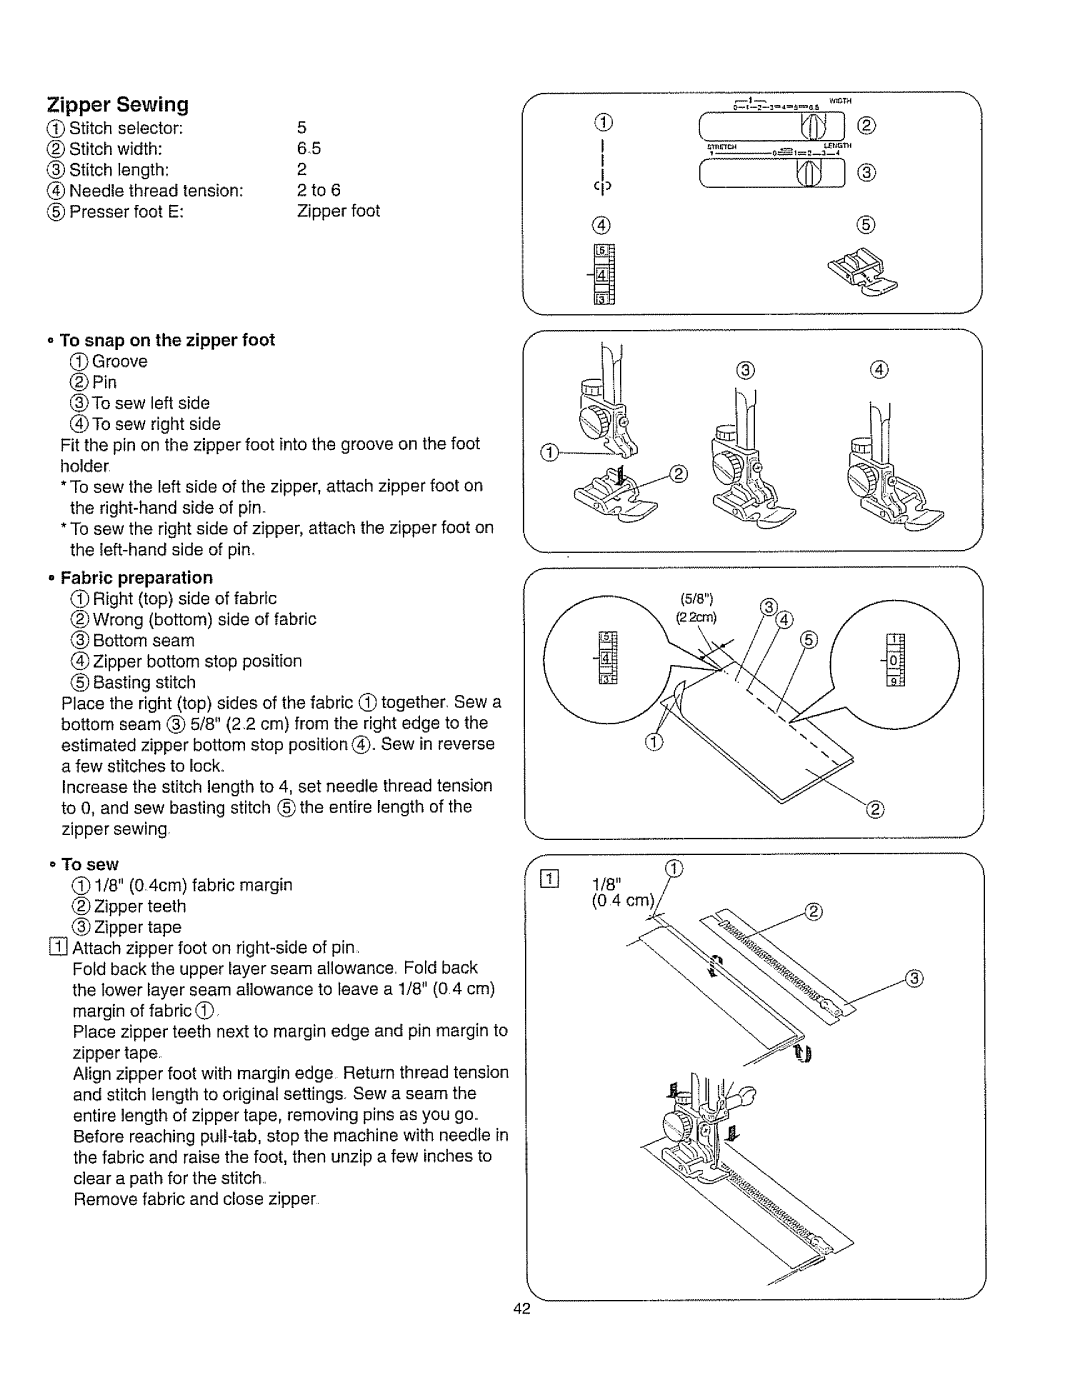 Kenmore 385.162213 owner manual @ j, Zipper Sewing, = To snap on the zipper foot Groove 